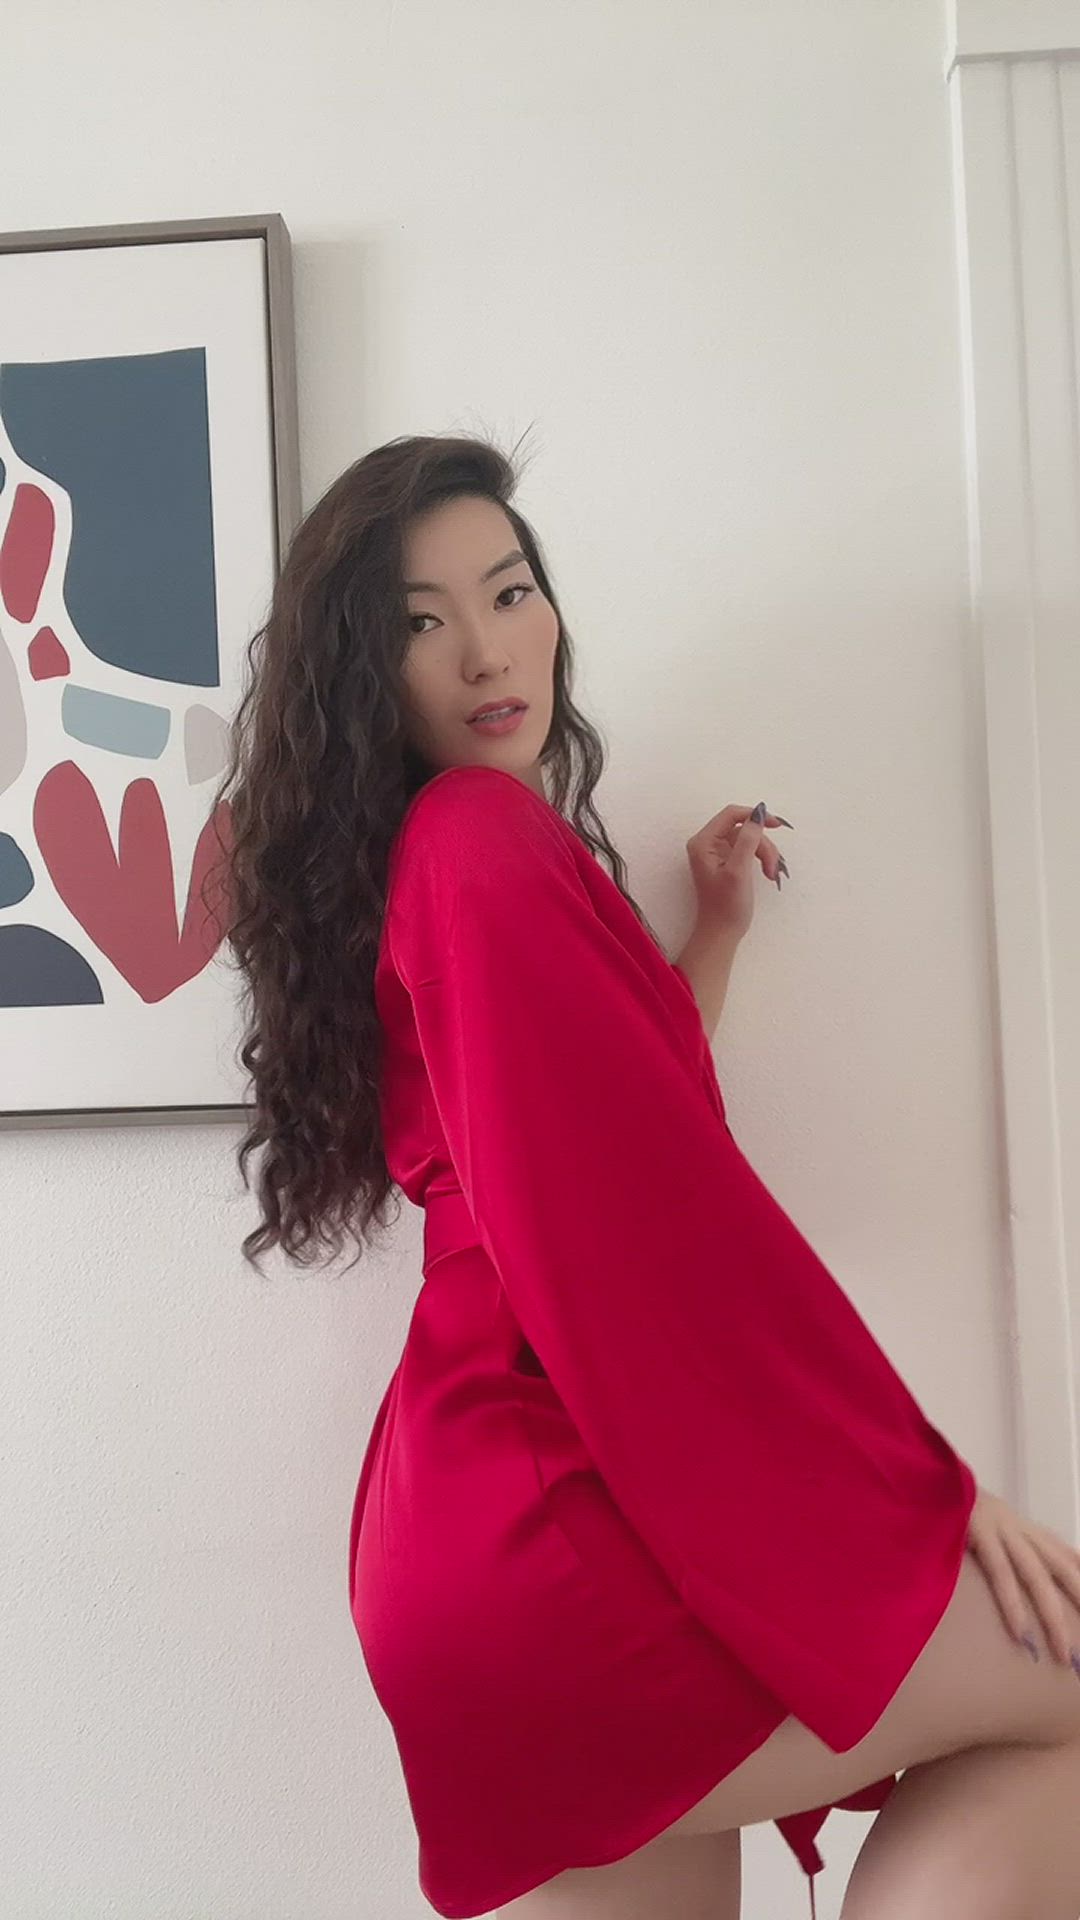 Asian porn video with onlyfans model hotvirgo <strong>@hot.virgo</strong>